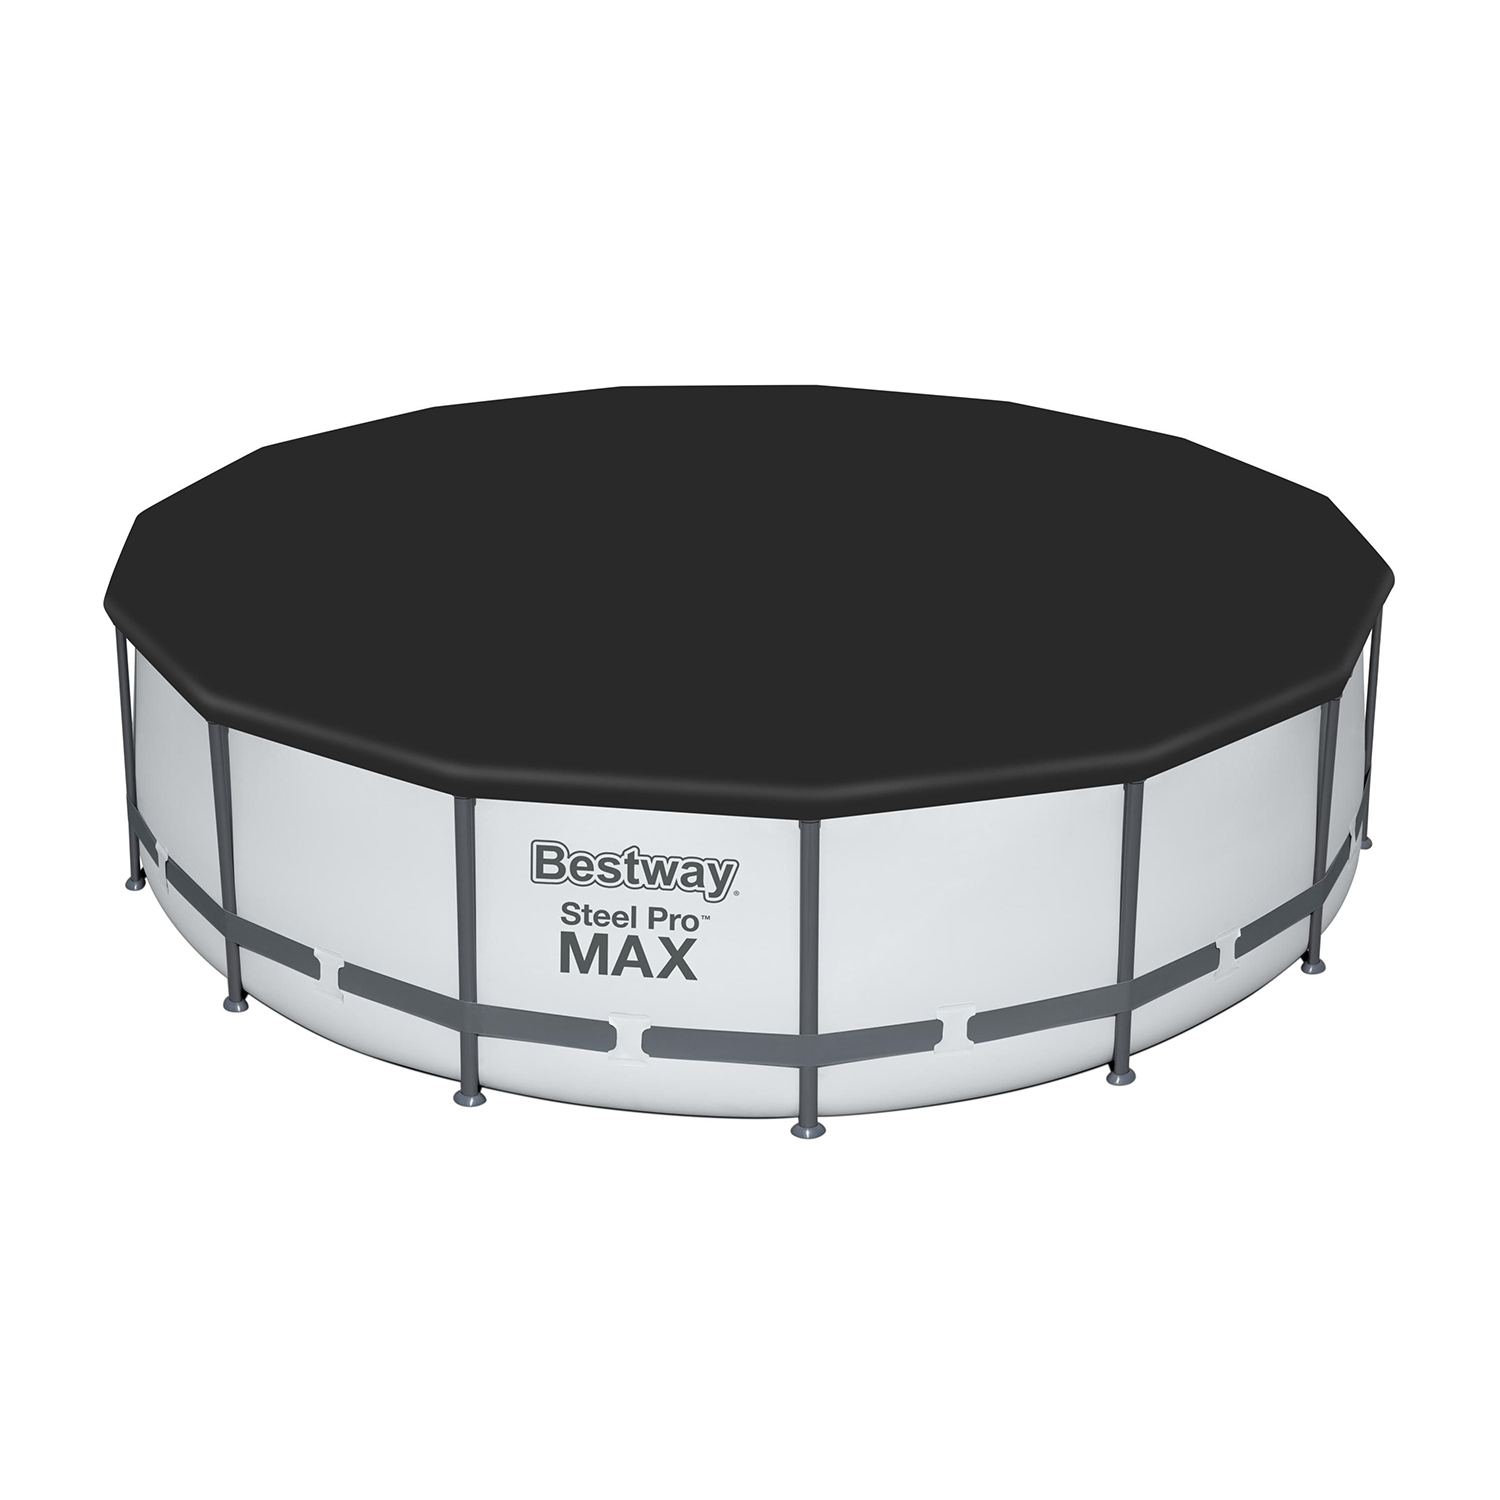 Bestway Steel Pro MAX 15' x 48" Round Above Ground Swimming Pool Set - image 4 of 11